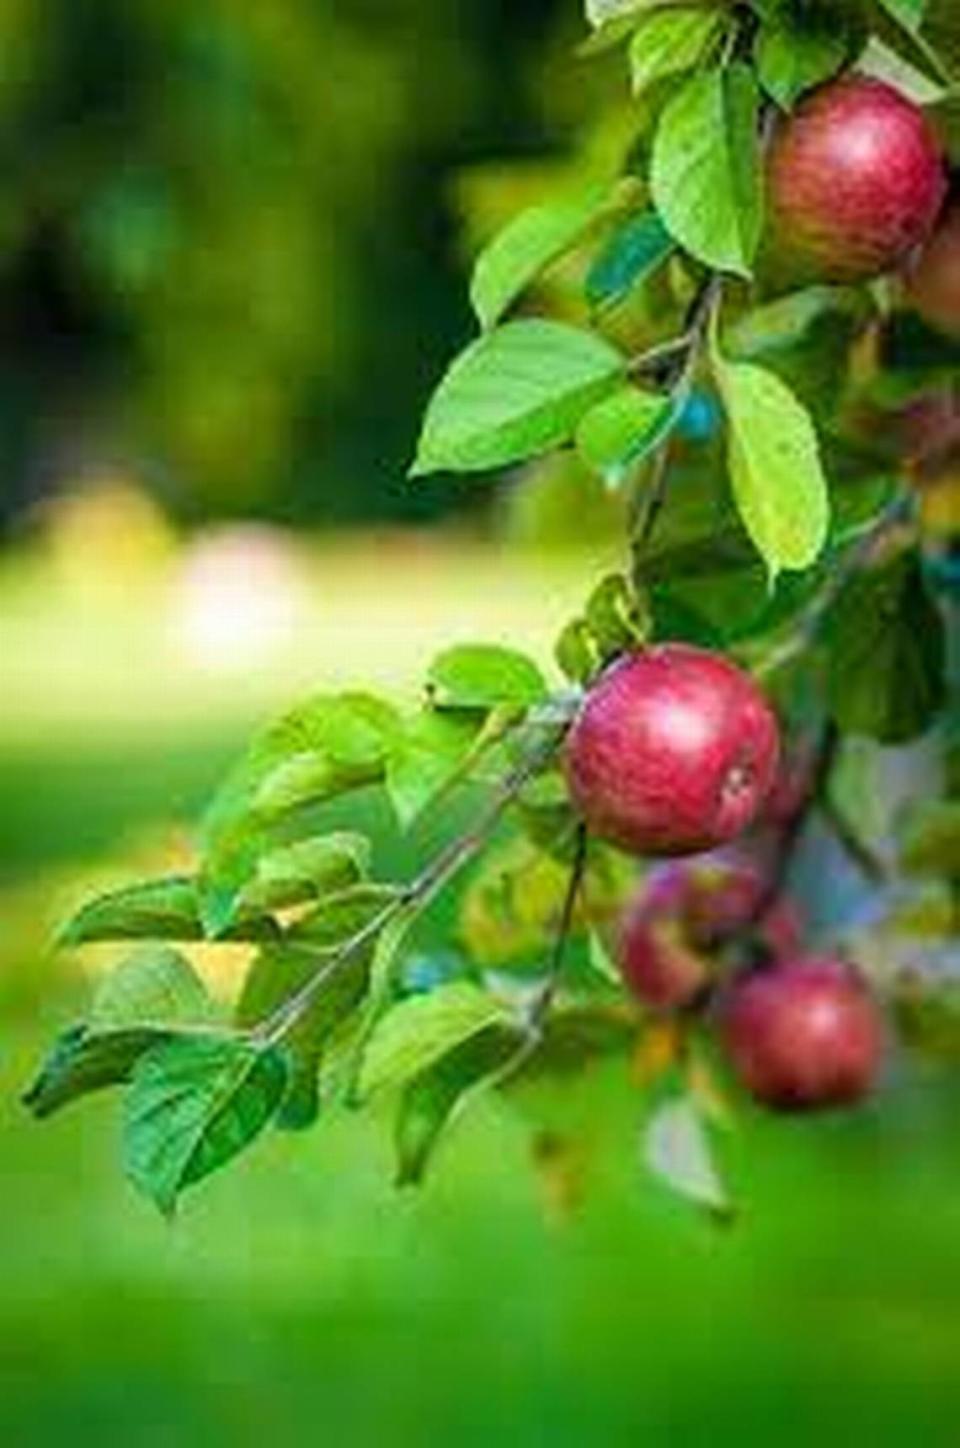 Picking your own apples is a chance to draw a direct line from the farm to the table. N.C. orchards offer at least 10 U-Pick options, despite a significantly smaller apple crop this year. 